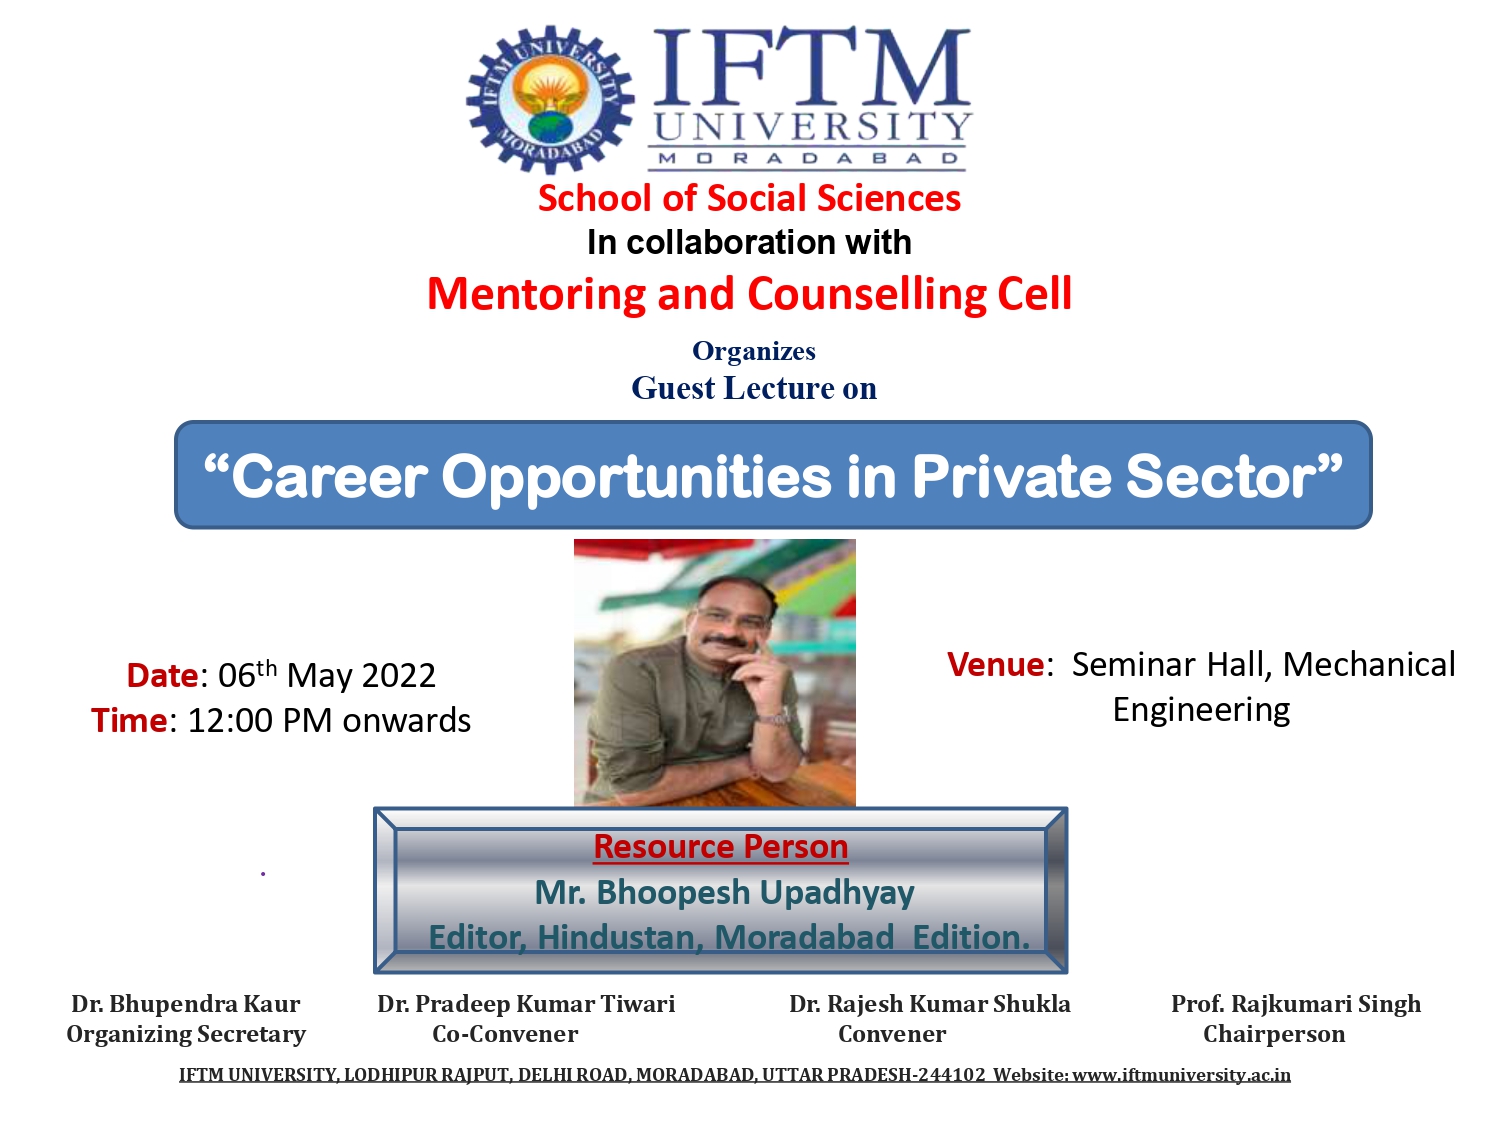 Guest Lecture on Career Opportunities in Private Sector